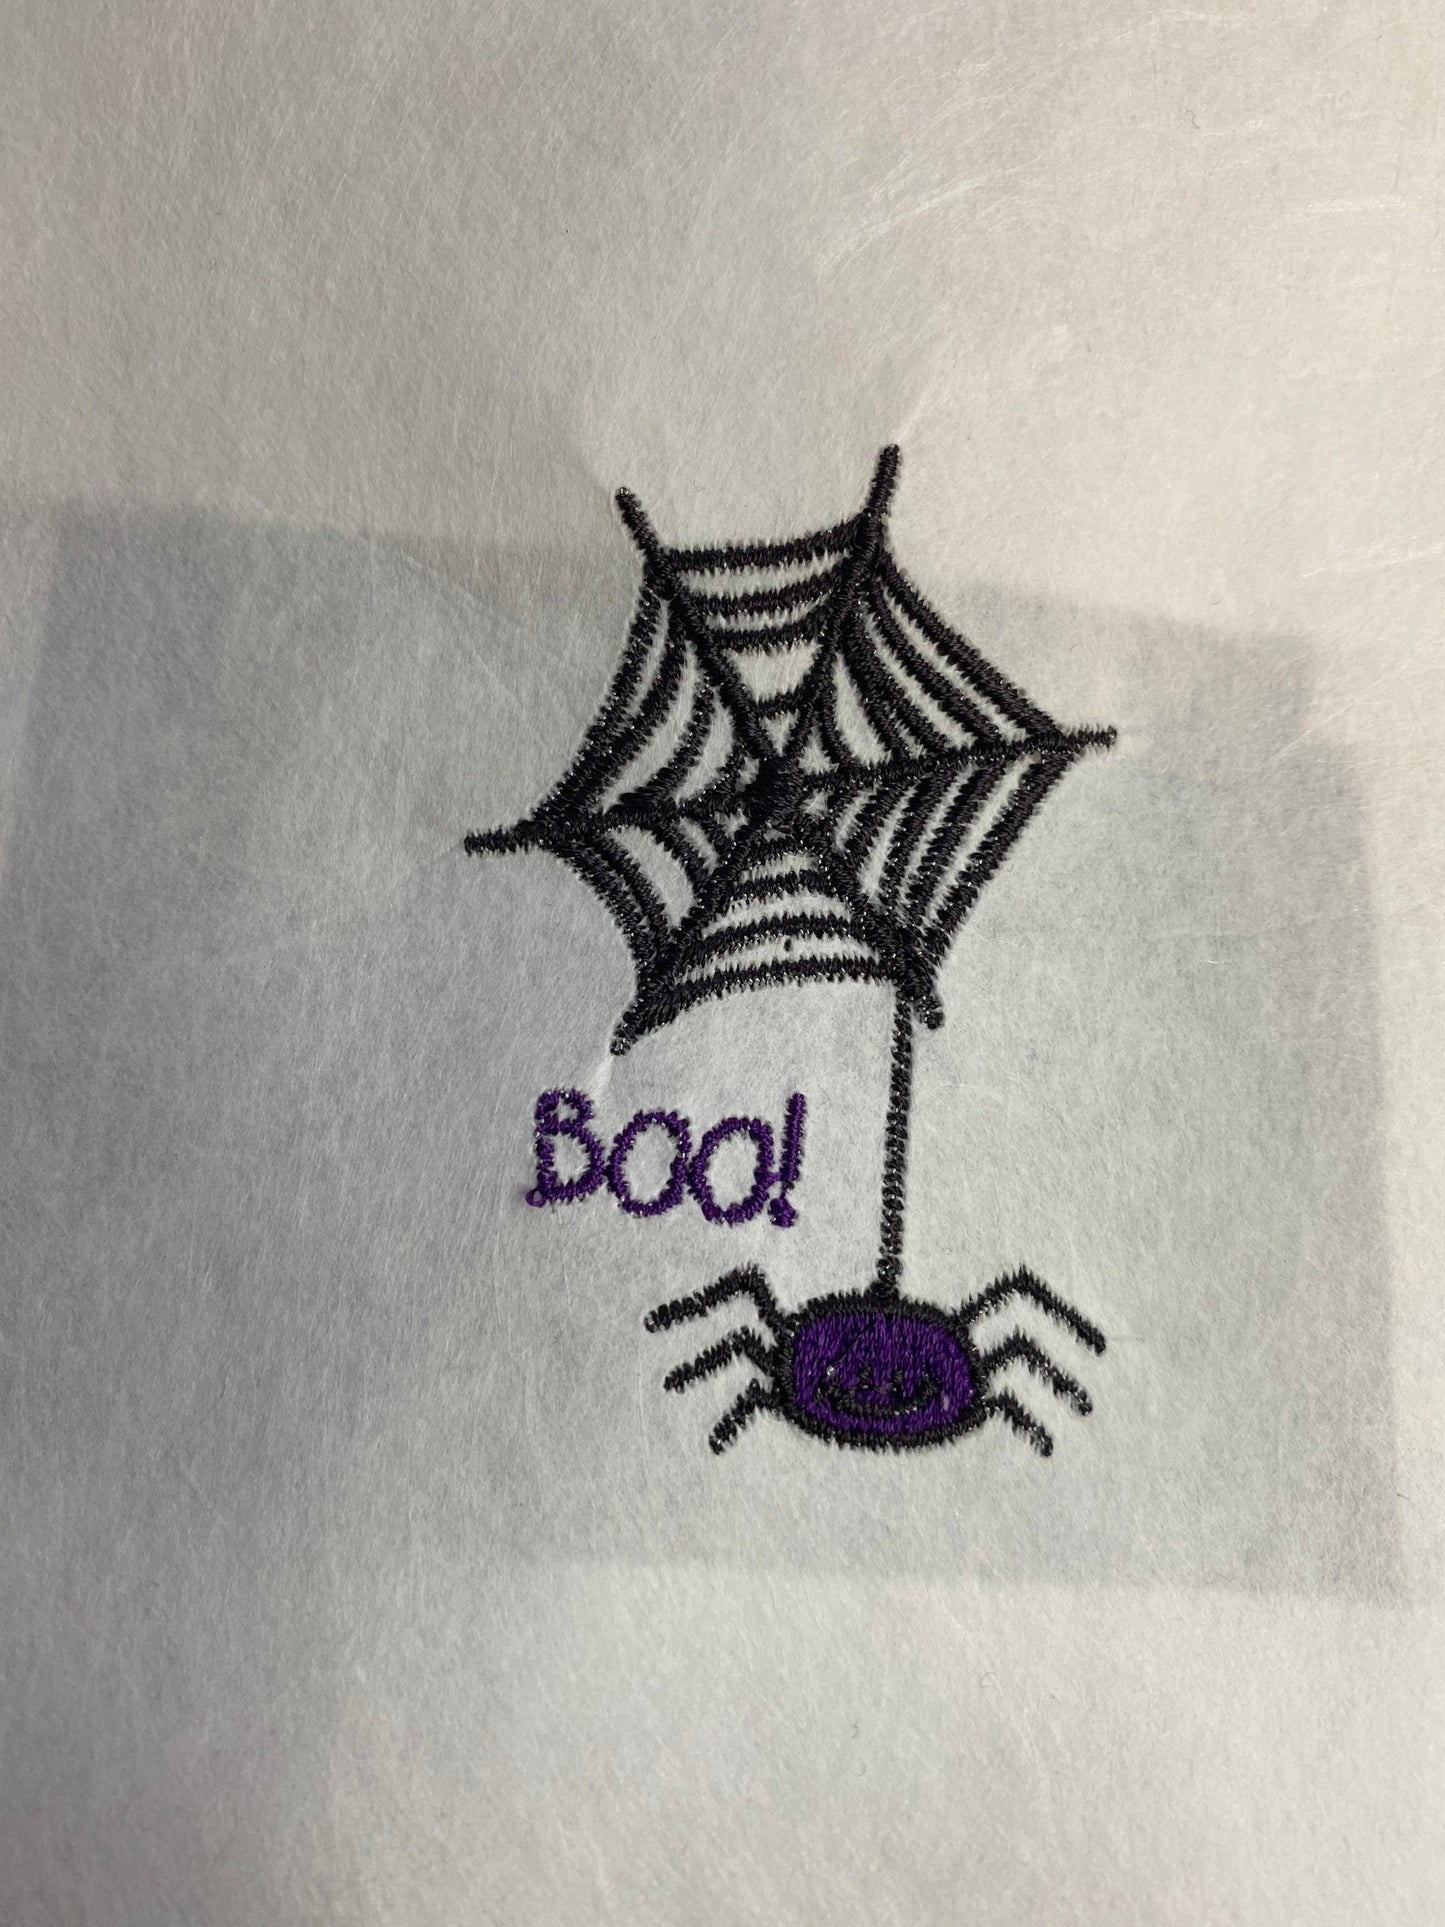 Halloween costume shirt tee tshirt t-shirt BOO Witch Mirror spider scary creepy embroidered embroidery fun pretty